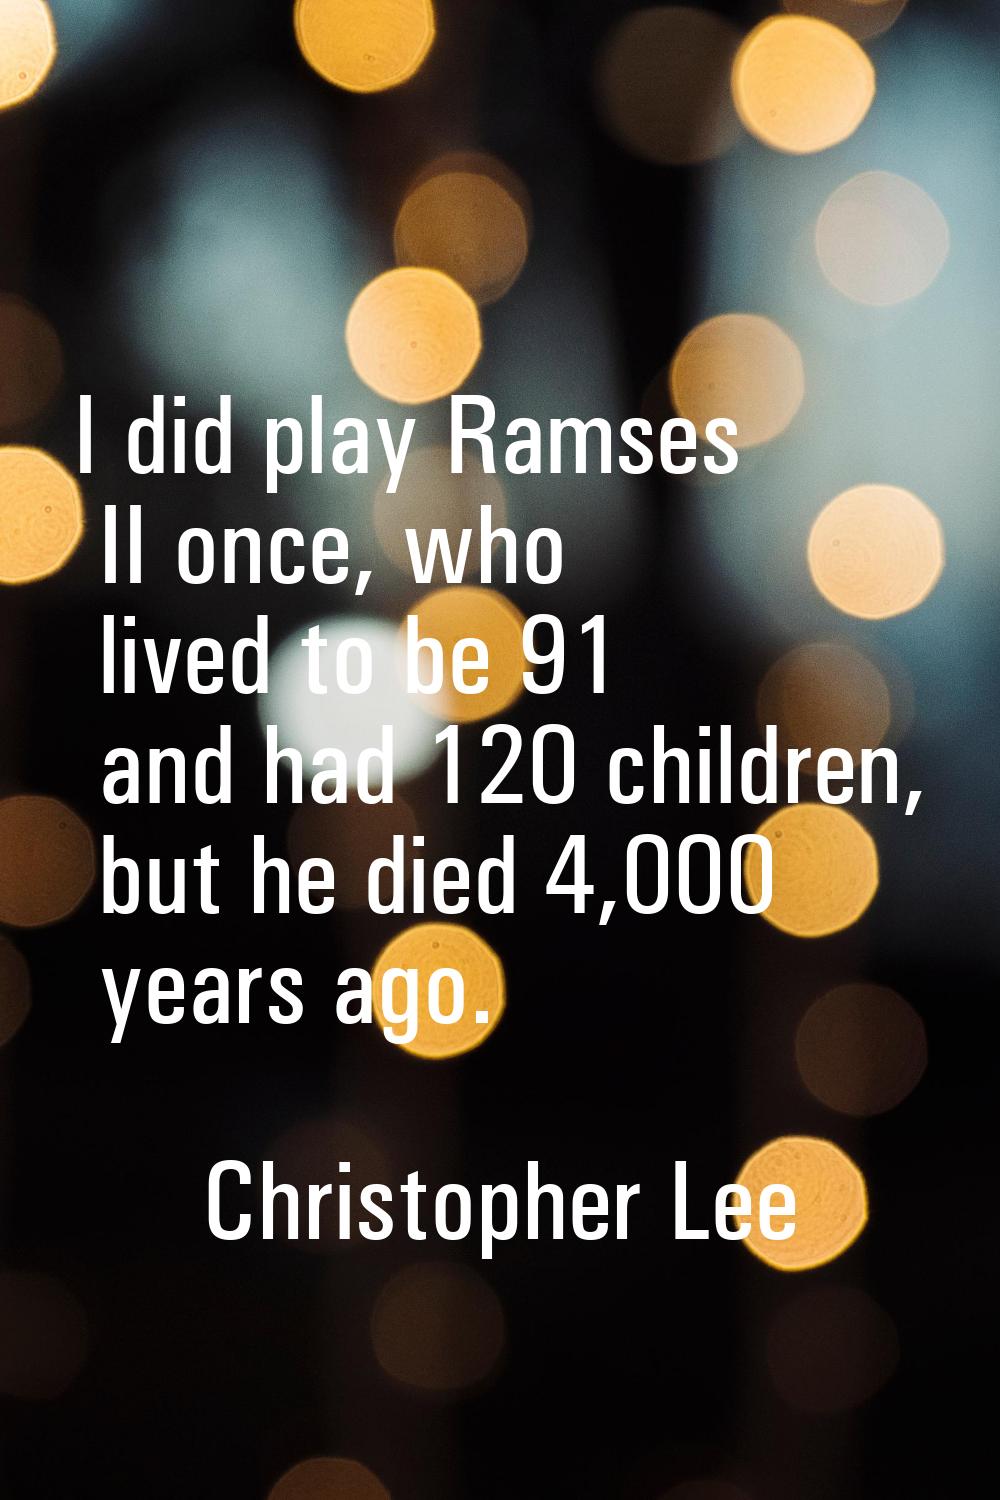 I did play Ramses II once, who lived to be 91 and had 120 children, but he died 4,000 years ago.